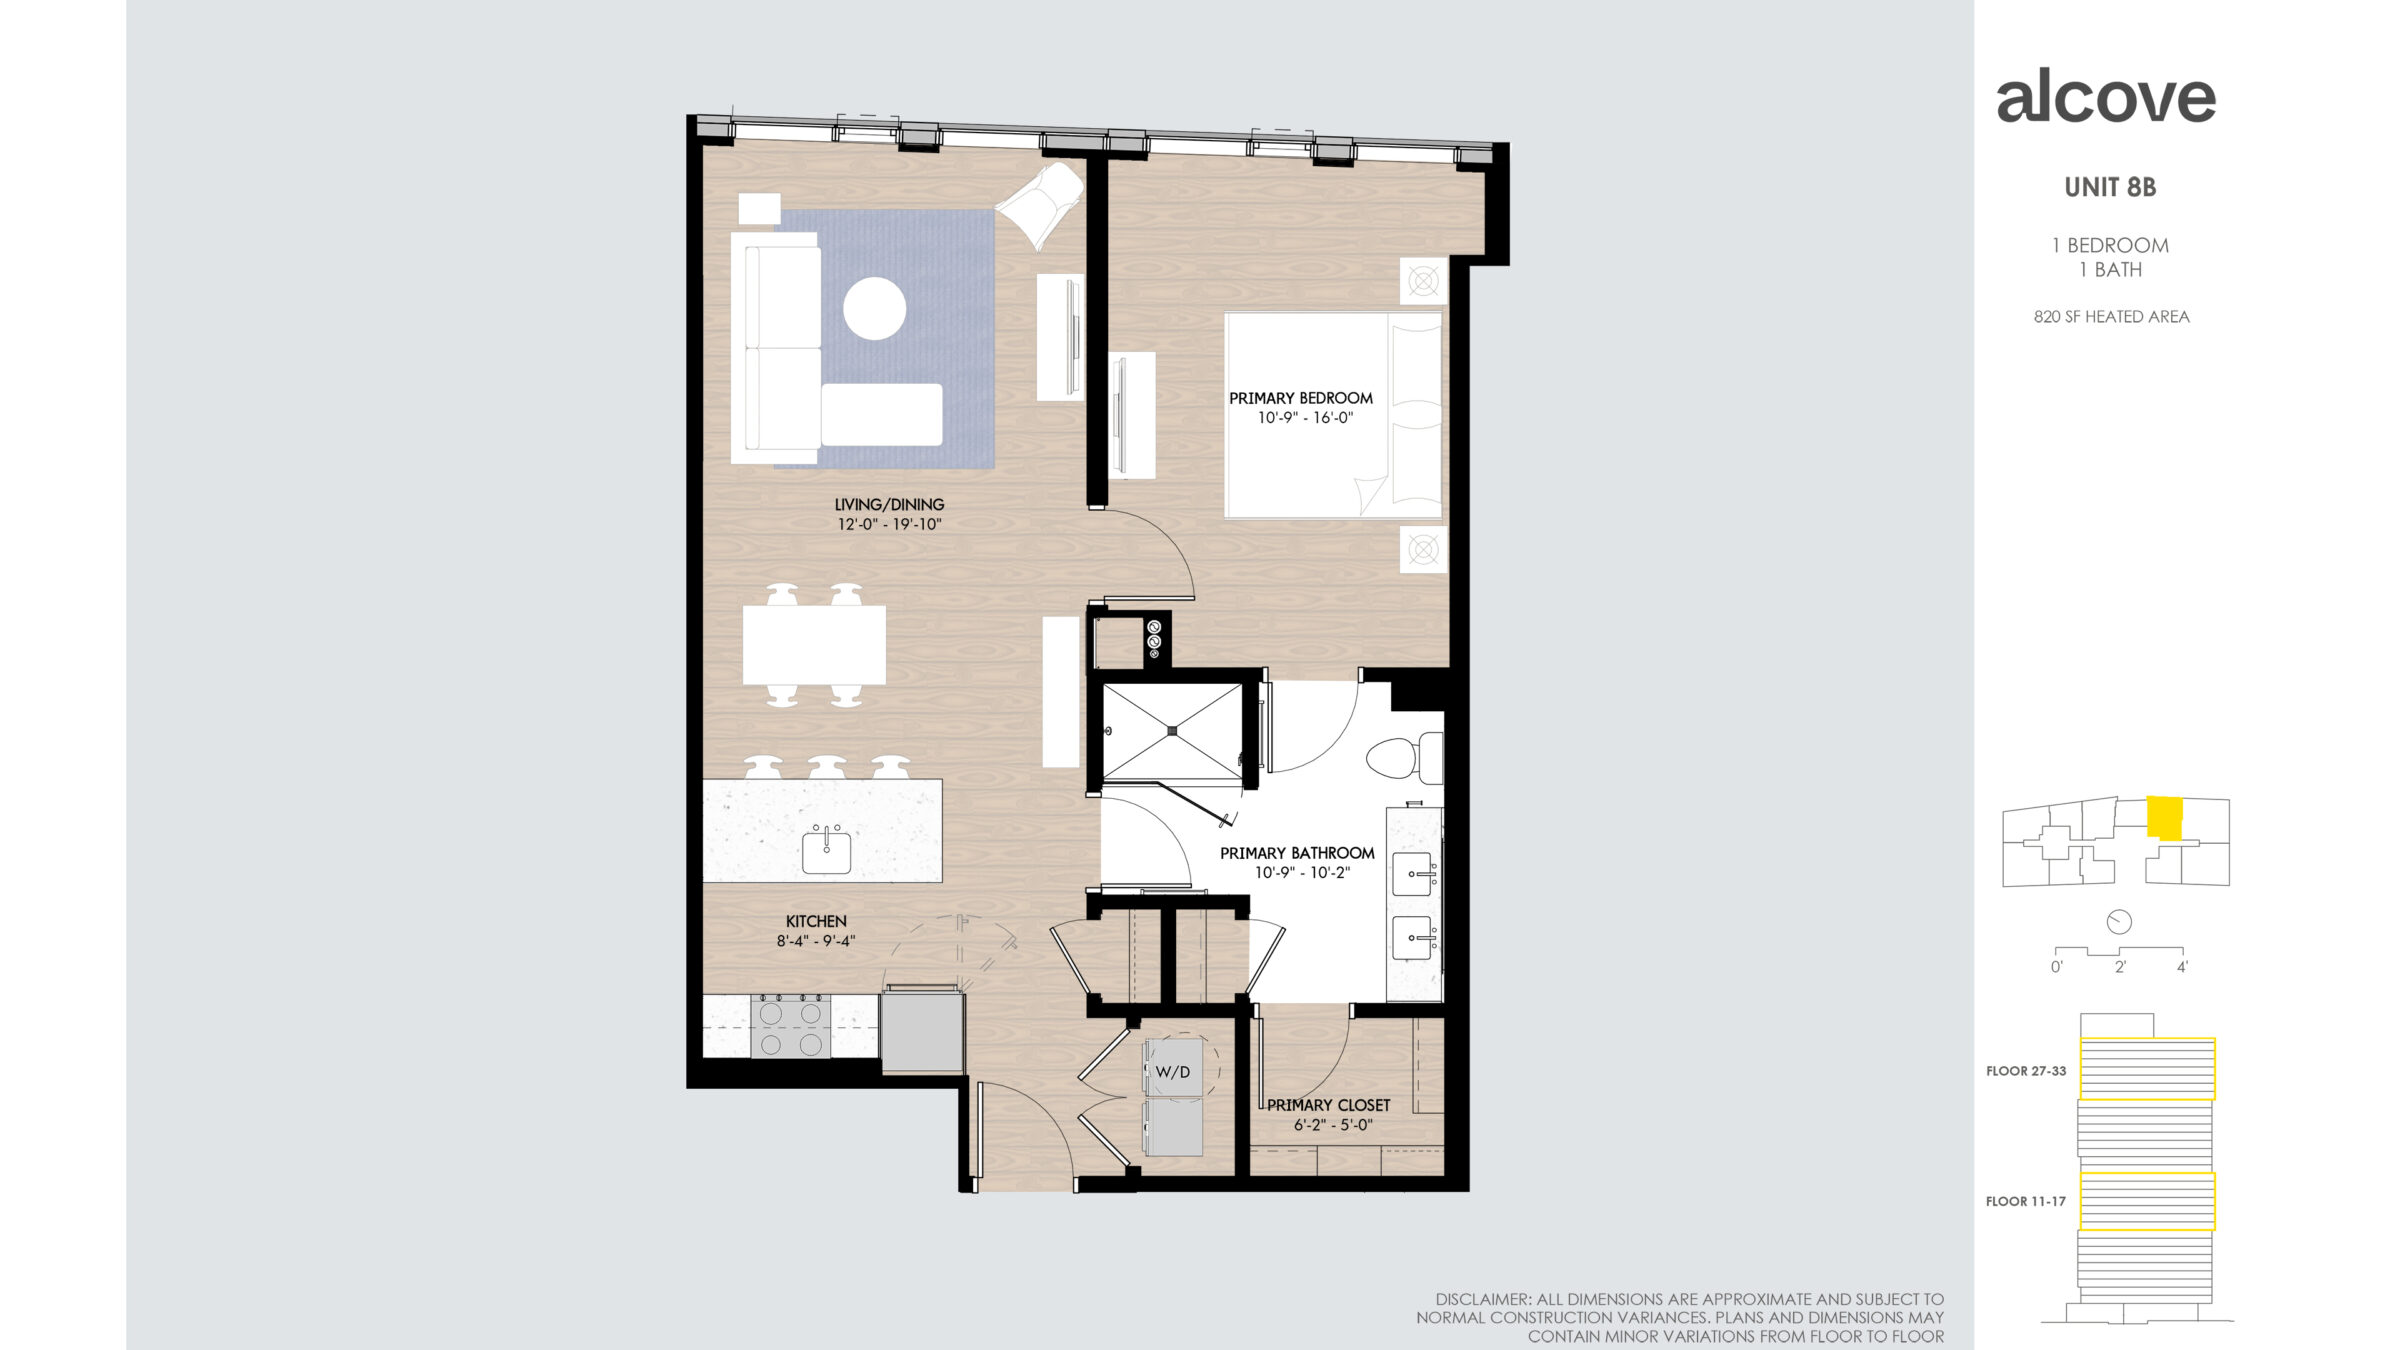 Image reads: UNIT 8B 1 BEDROOM 1 BATH 820 SF HEATED AREA Floor 27-33 Floor 11-17 Disclaimer: all dimensions are approximate and subject to normal construction variances. Plans and dimensions may contain minor variations from floor to floor. 